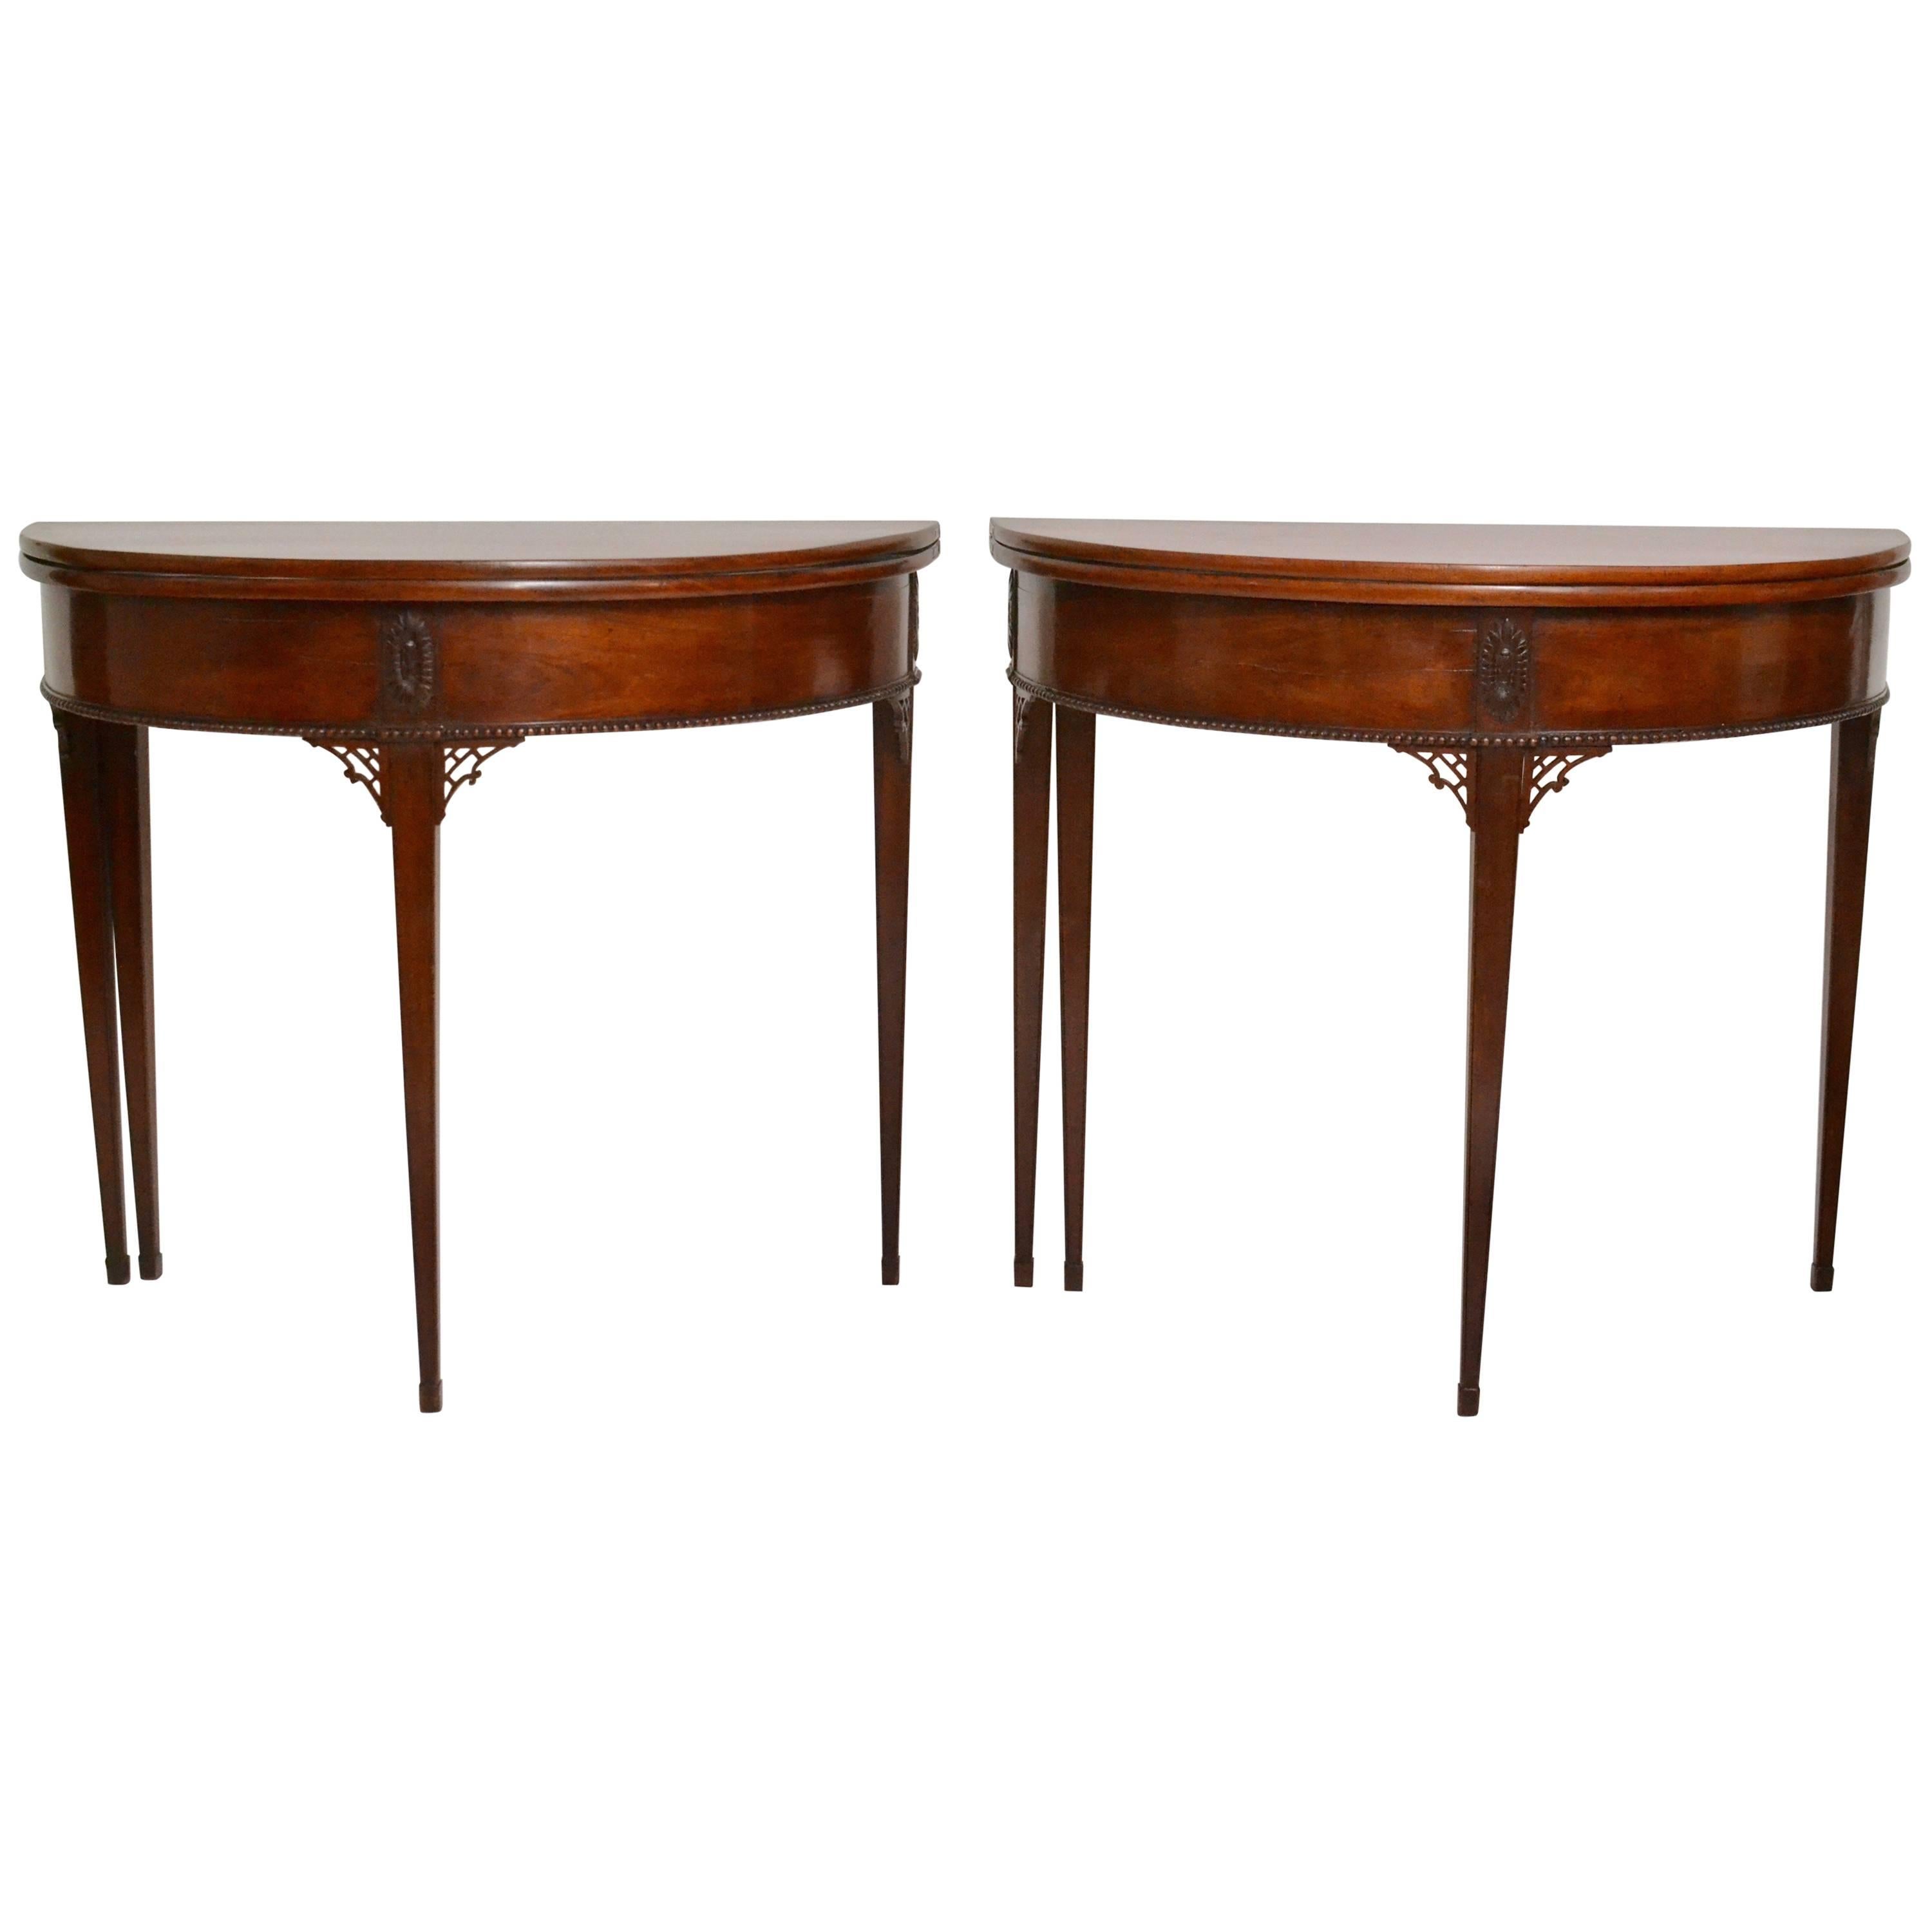 Pair of Gustavian Mahogany Games Tables Attributed to Carl Diedrik Fick